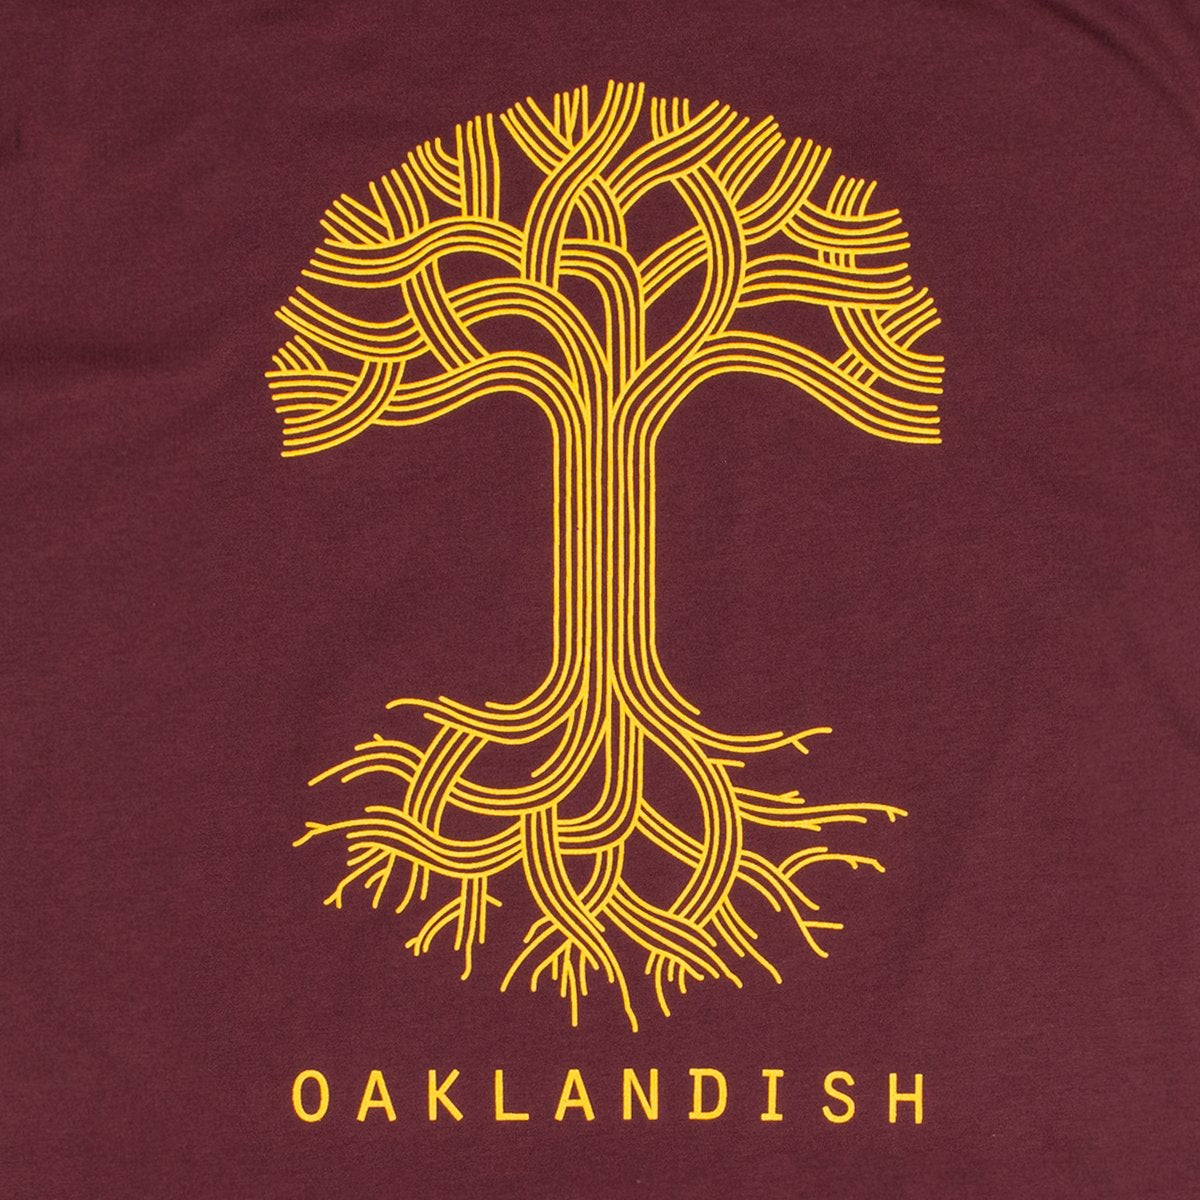 Close-up of a large yellow Oaklandish tree logo on the chest of a burgundy t-shirt.